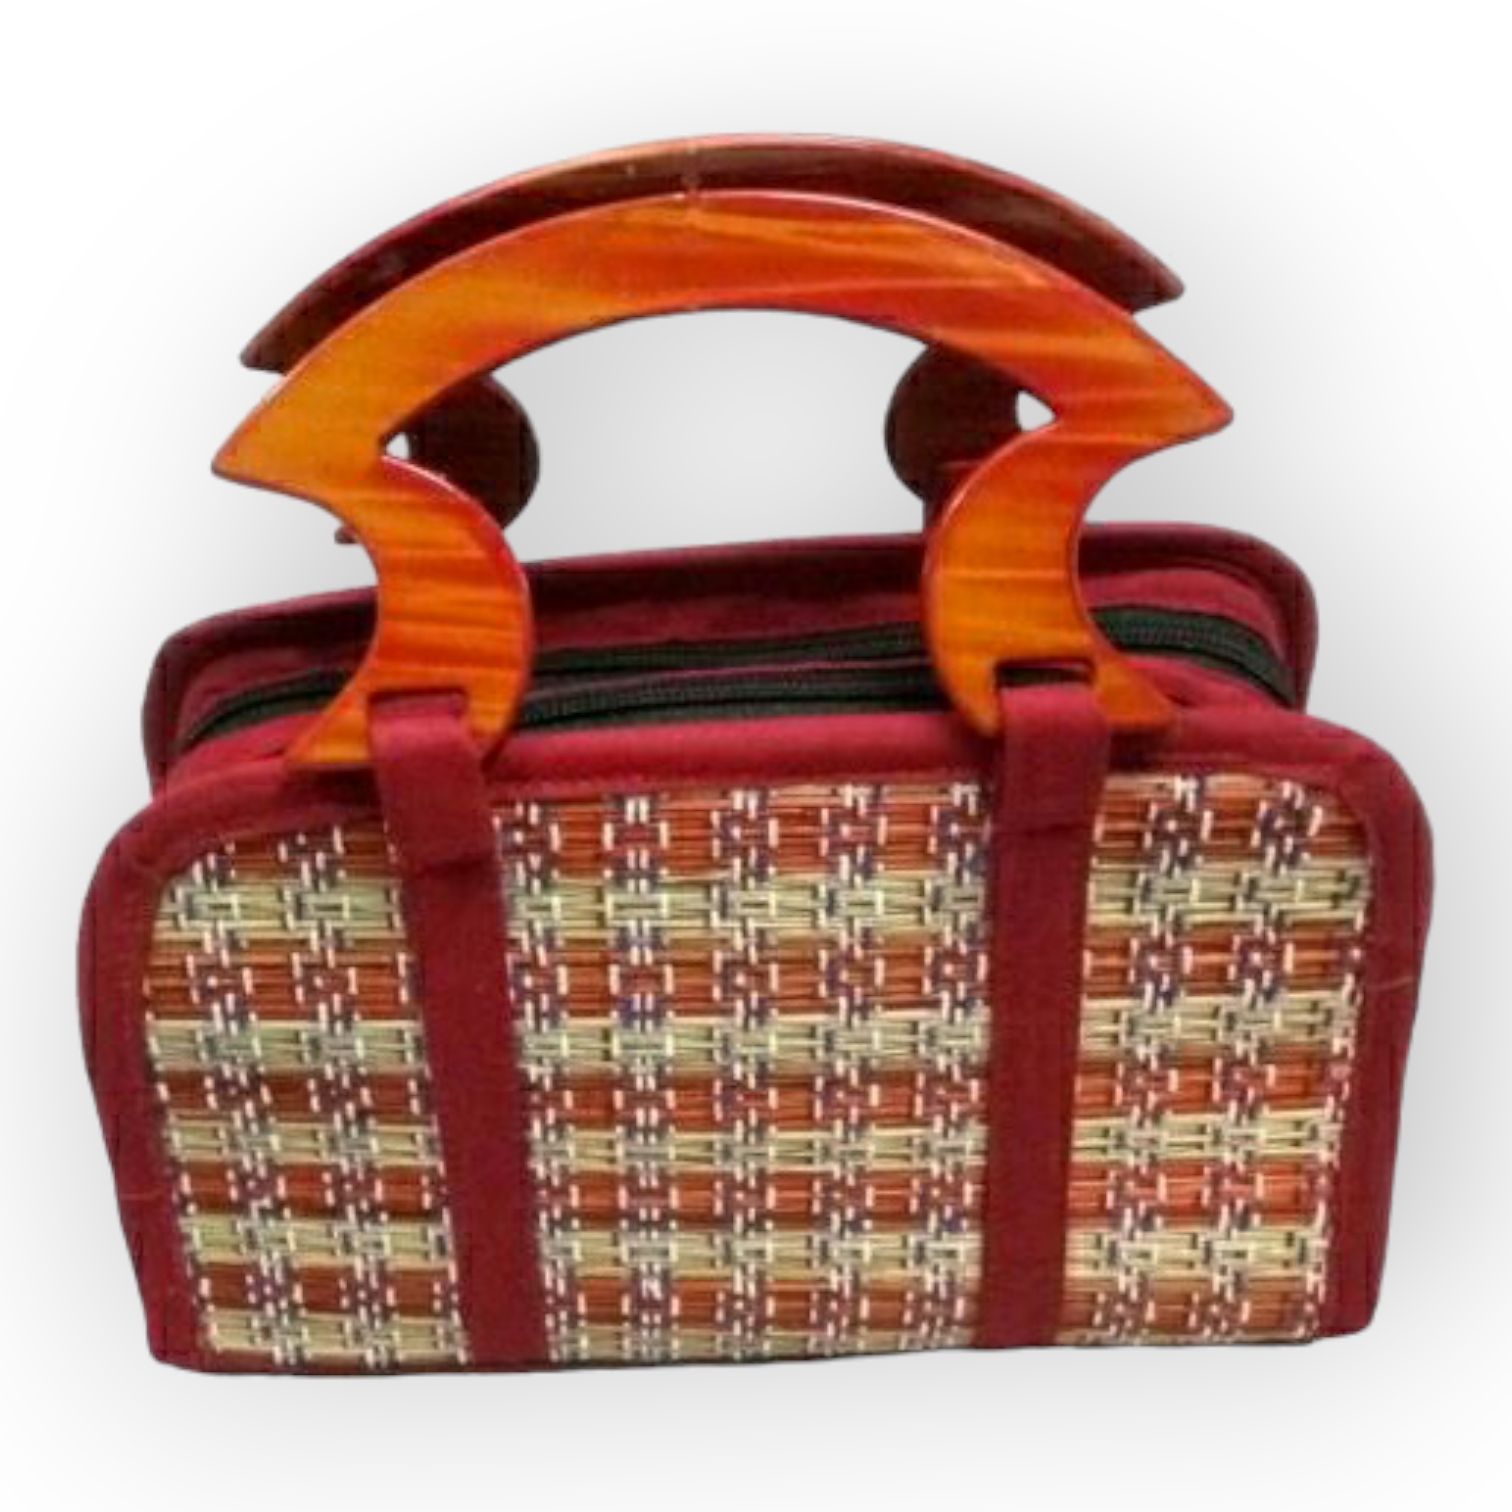 Madur Kathi Cosmetic Bag in Maroon Colour